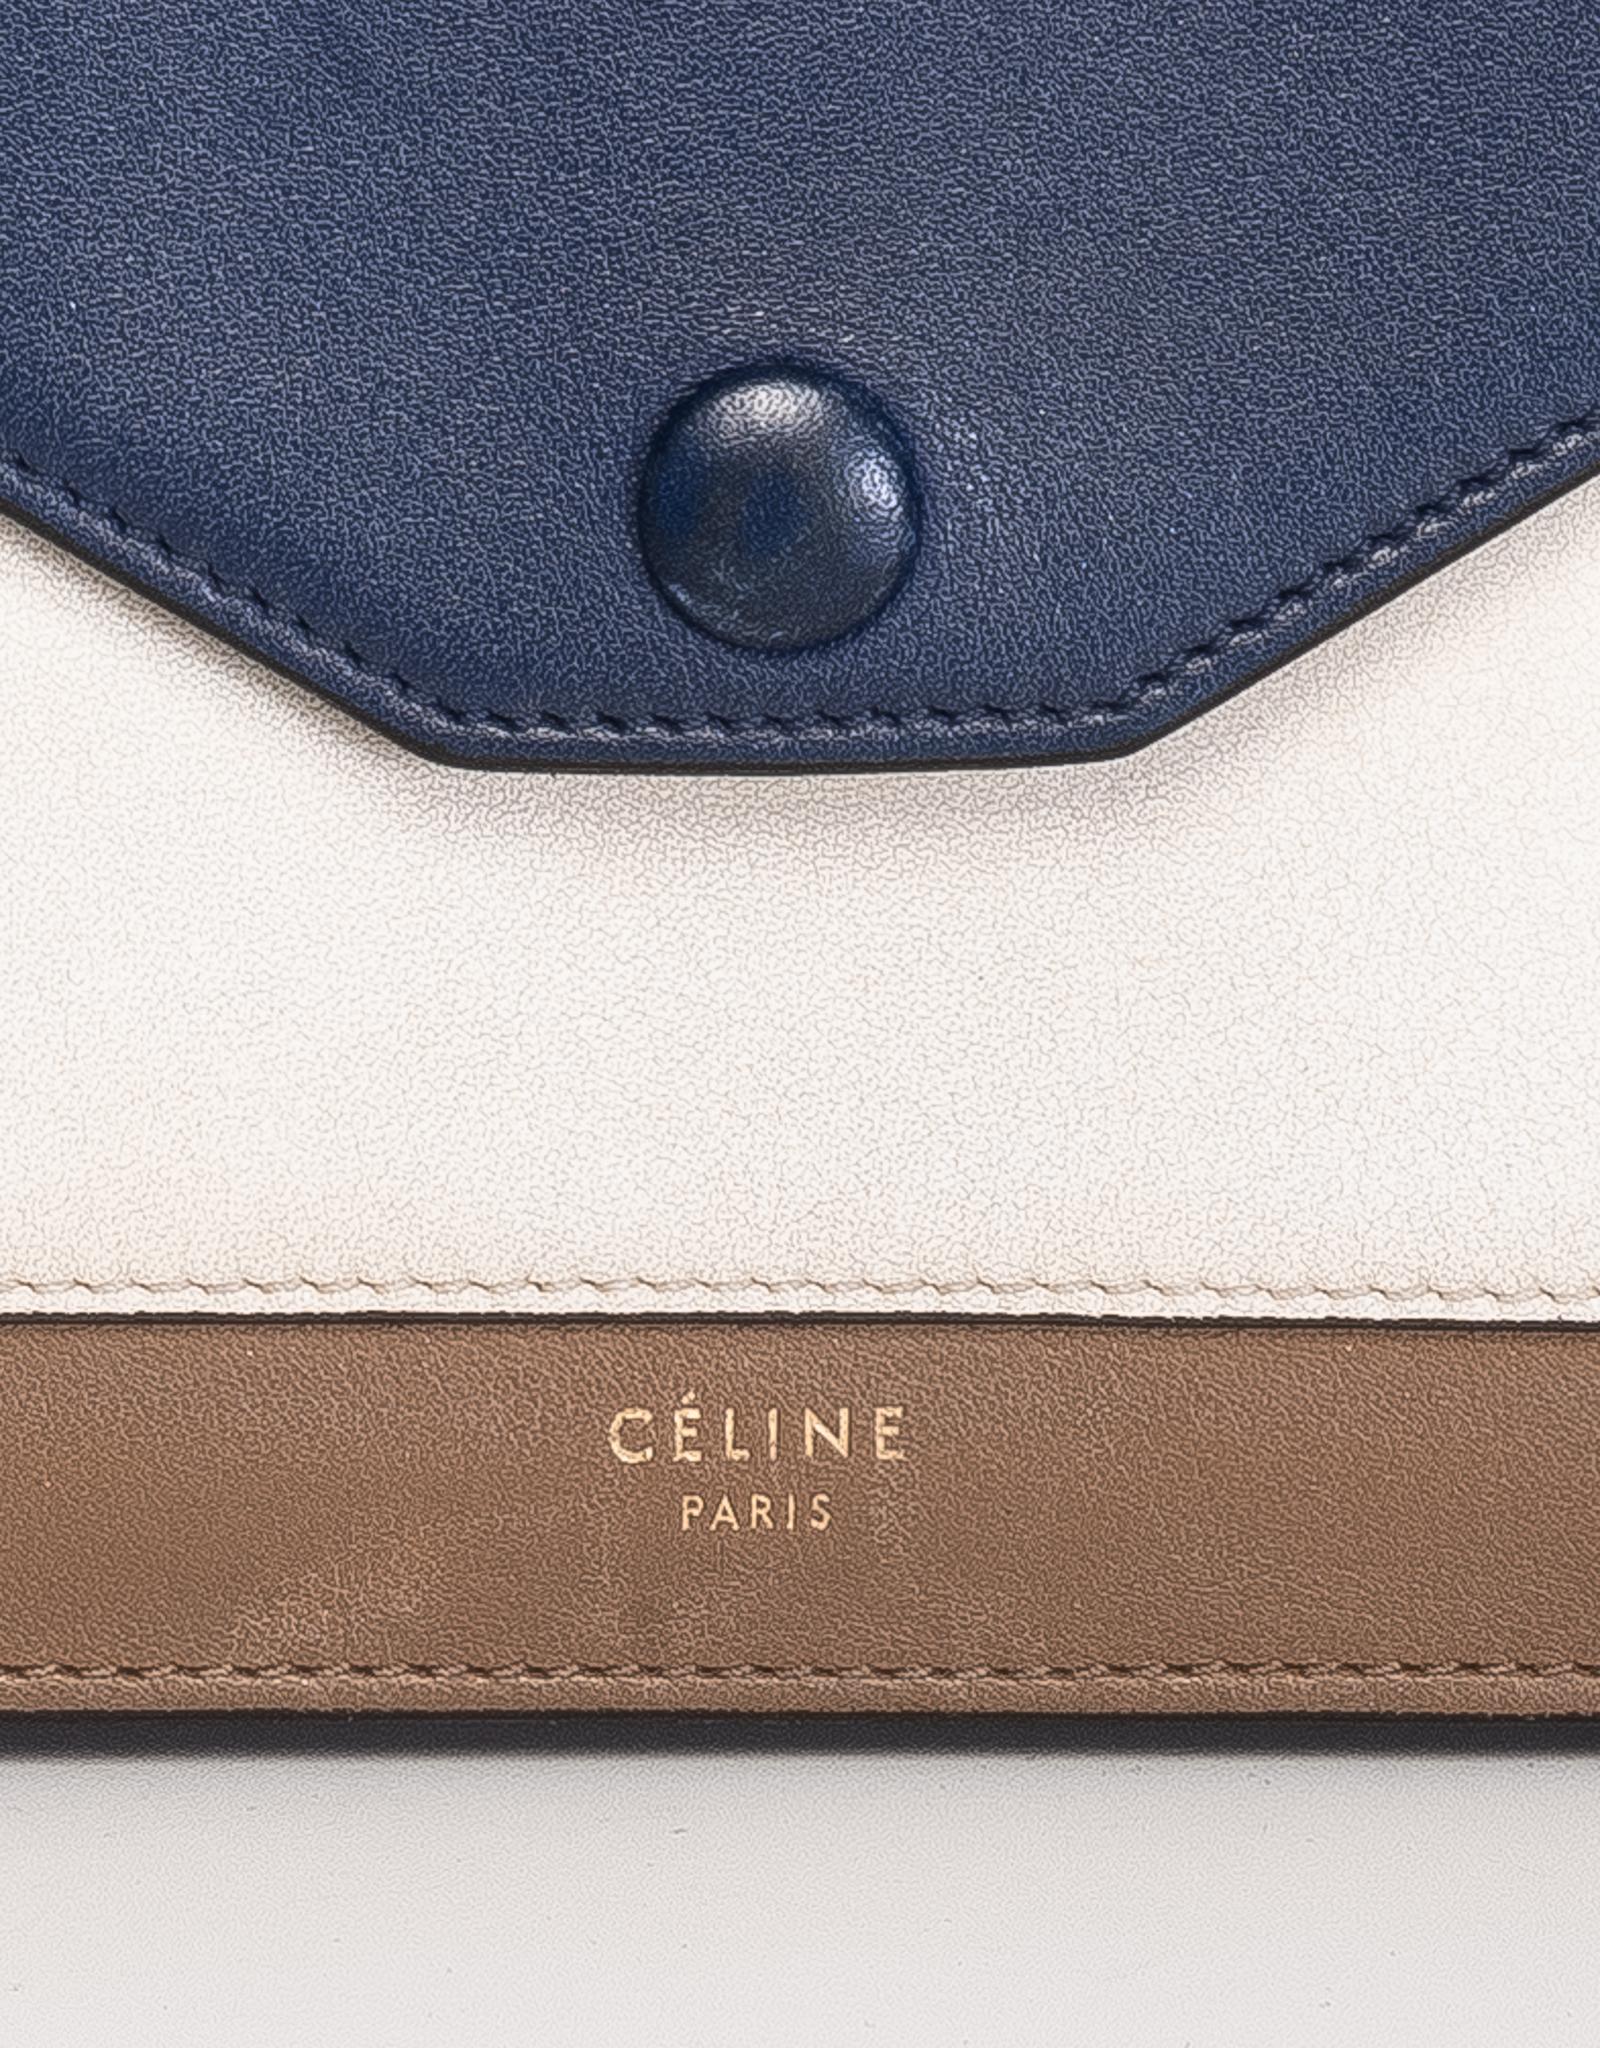 Celine wallet made of cream and brown leather with a blue flap with snap closure. The interior has brown leather with three compartments; two for cards and one middle zipper coin pocket.

COLOR: Blue, cream and brown
MATERIAL: Leather
DATE CODE: